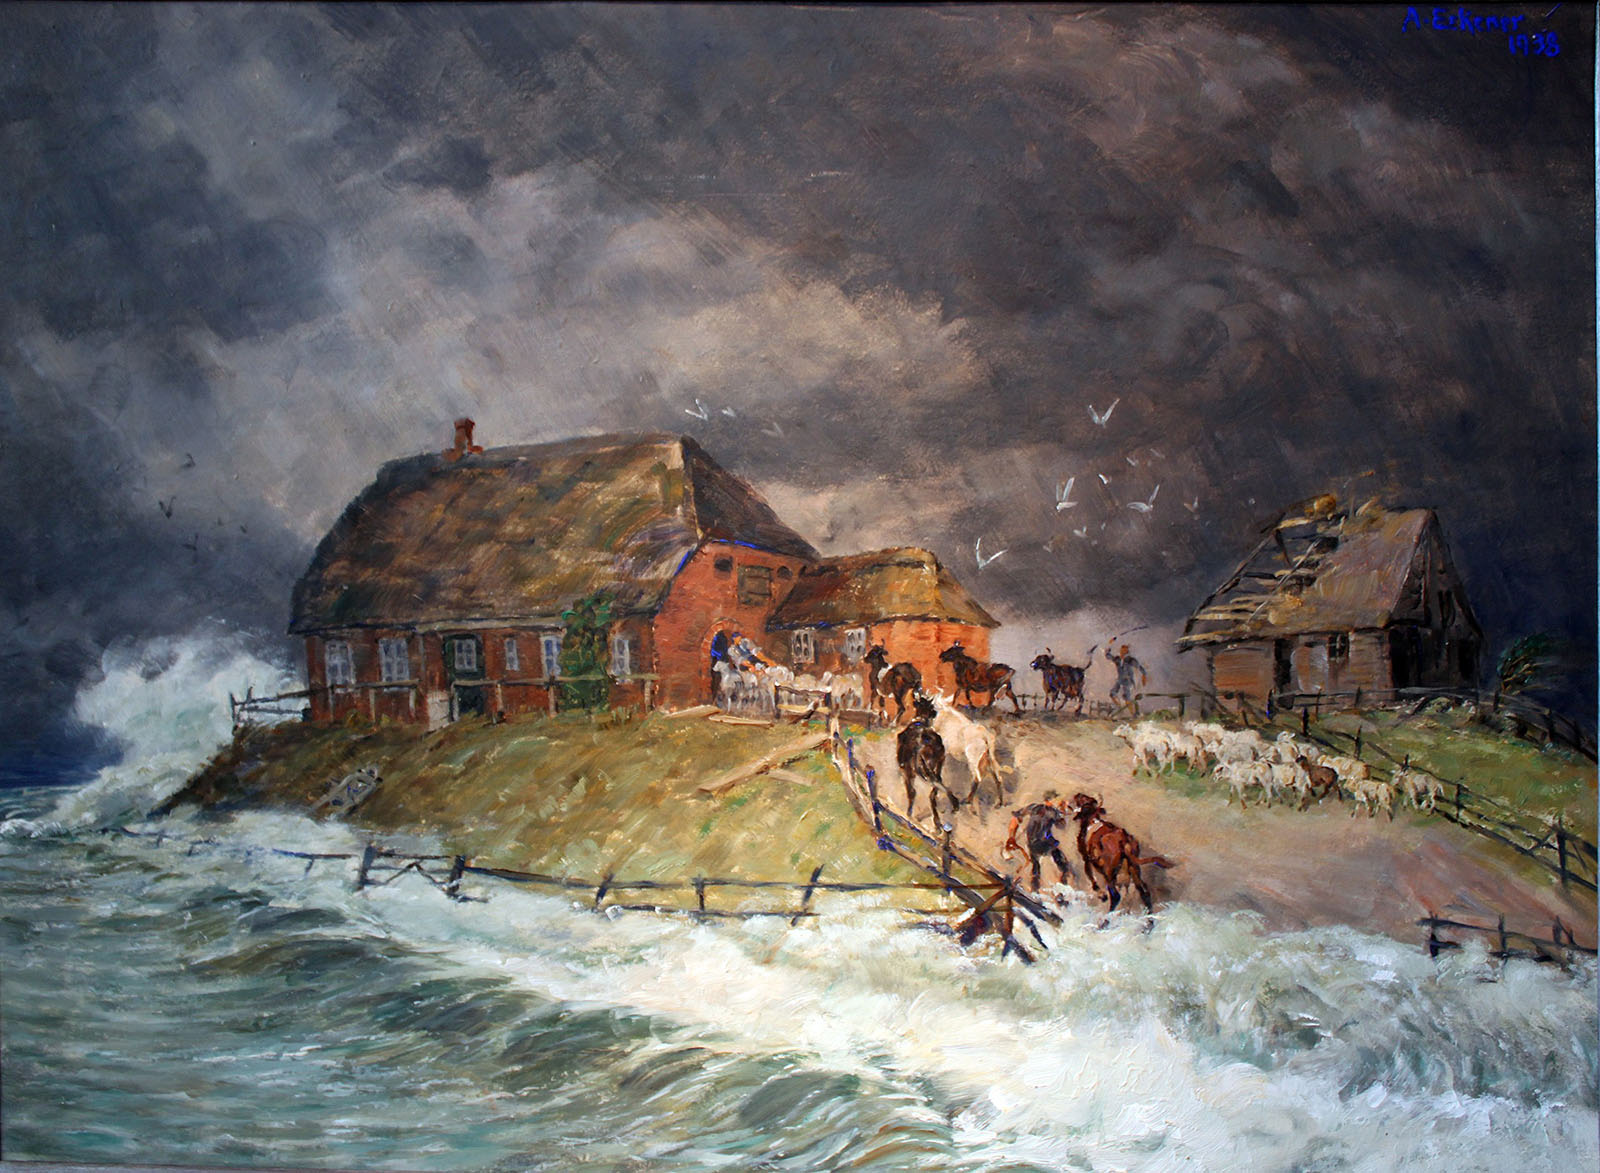 "Hallig during a storm tide" by Alexander Eckener. This 1906 painting is of a North Frisian Wadden Sea dwelling mound in a rough storm. Rungholt would have likely looked like a series of similar mounds. Image by Alexander Eckener/Wikipedia/Creative Commons